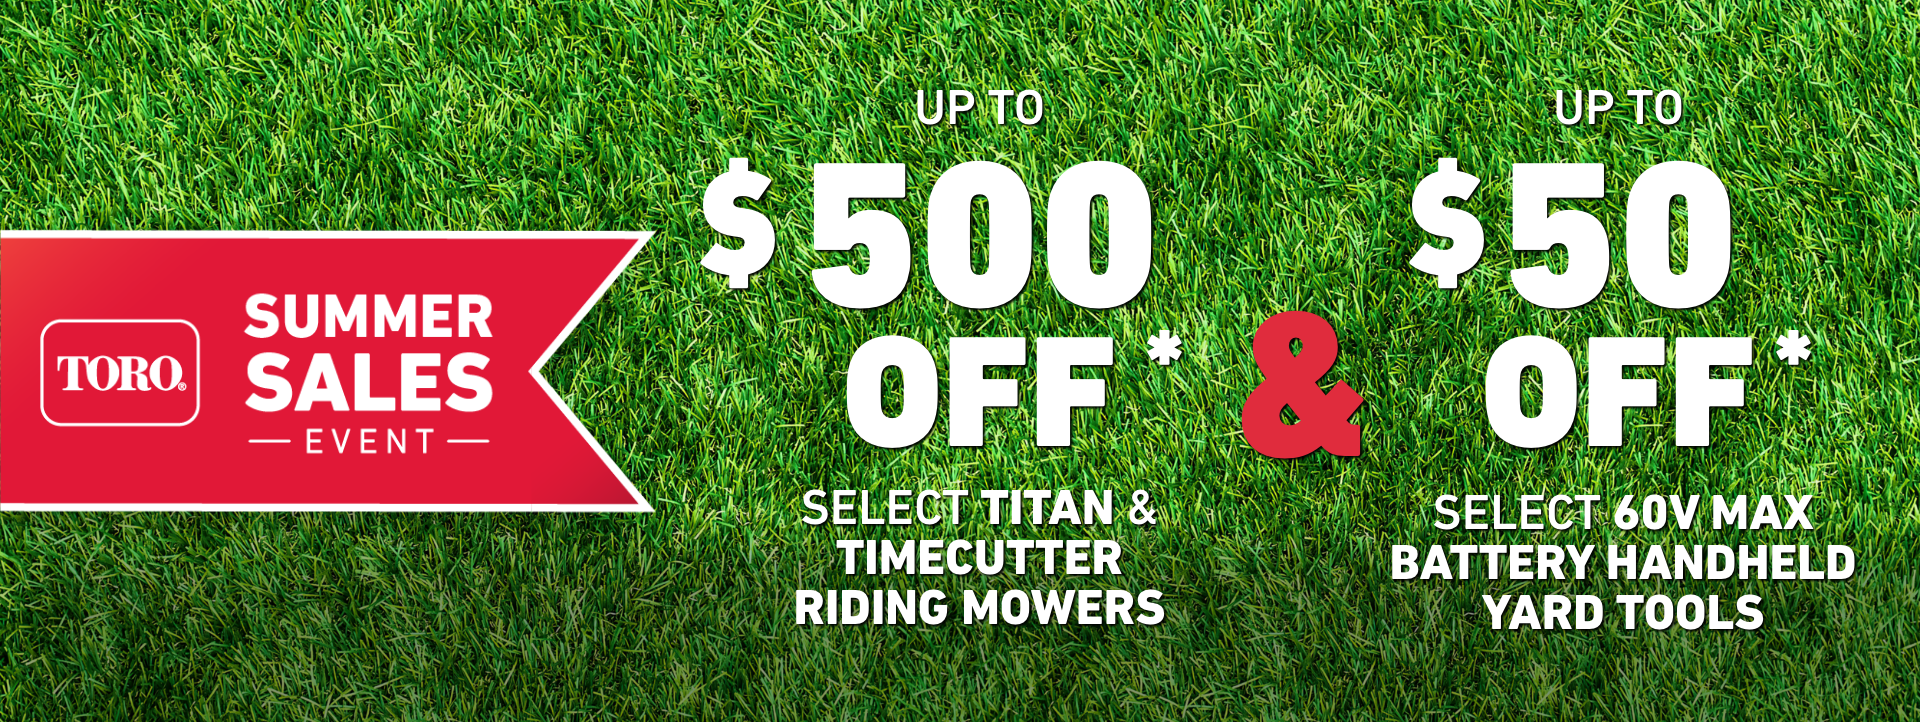 2023 Toro Summer Sale - Up to $500 off and Up to $50 off 60V Battery Handheld Yard Tools